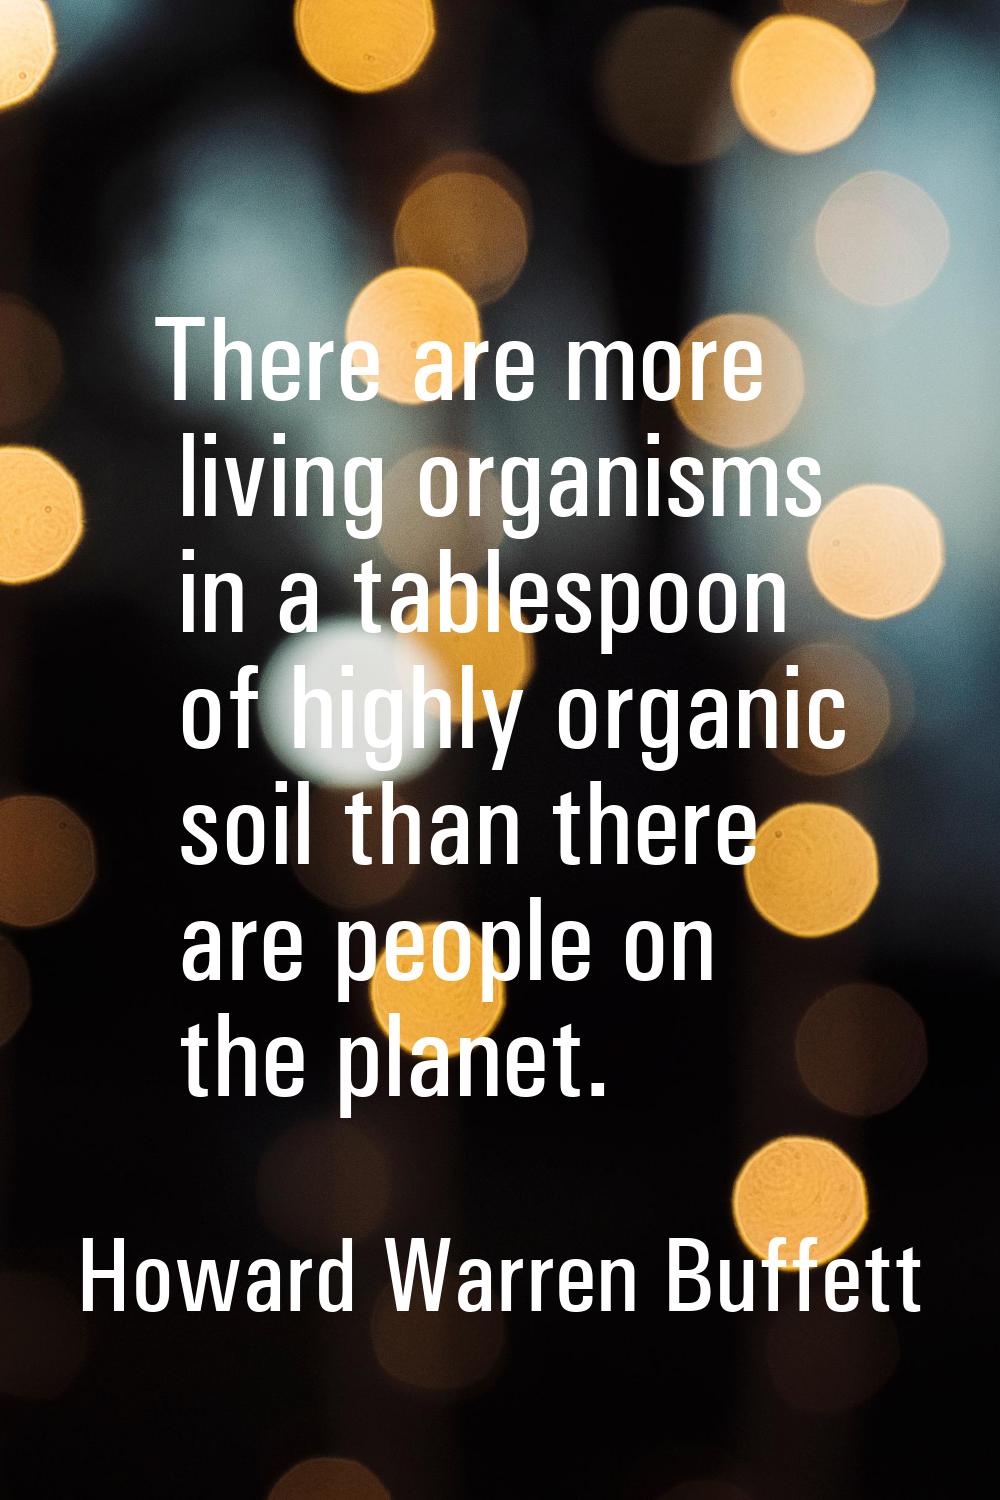 There are more living organisms in a tablespoon of highly organic soil than there are people on the